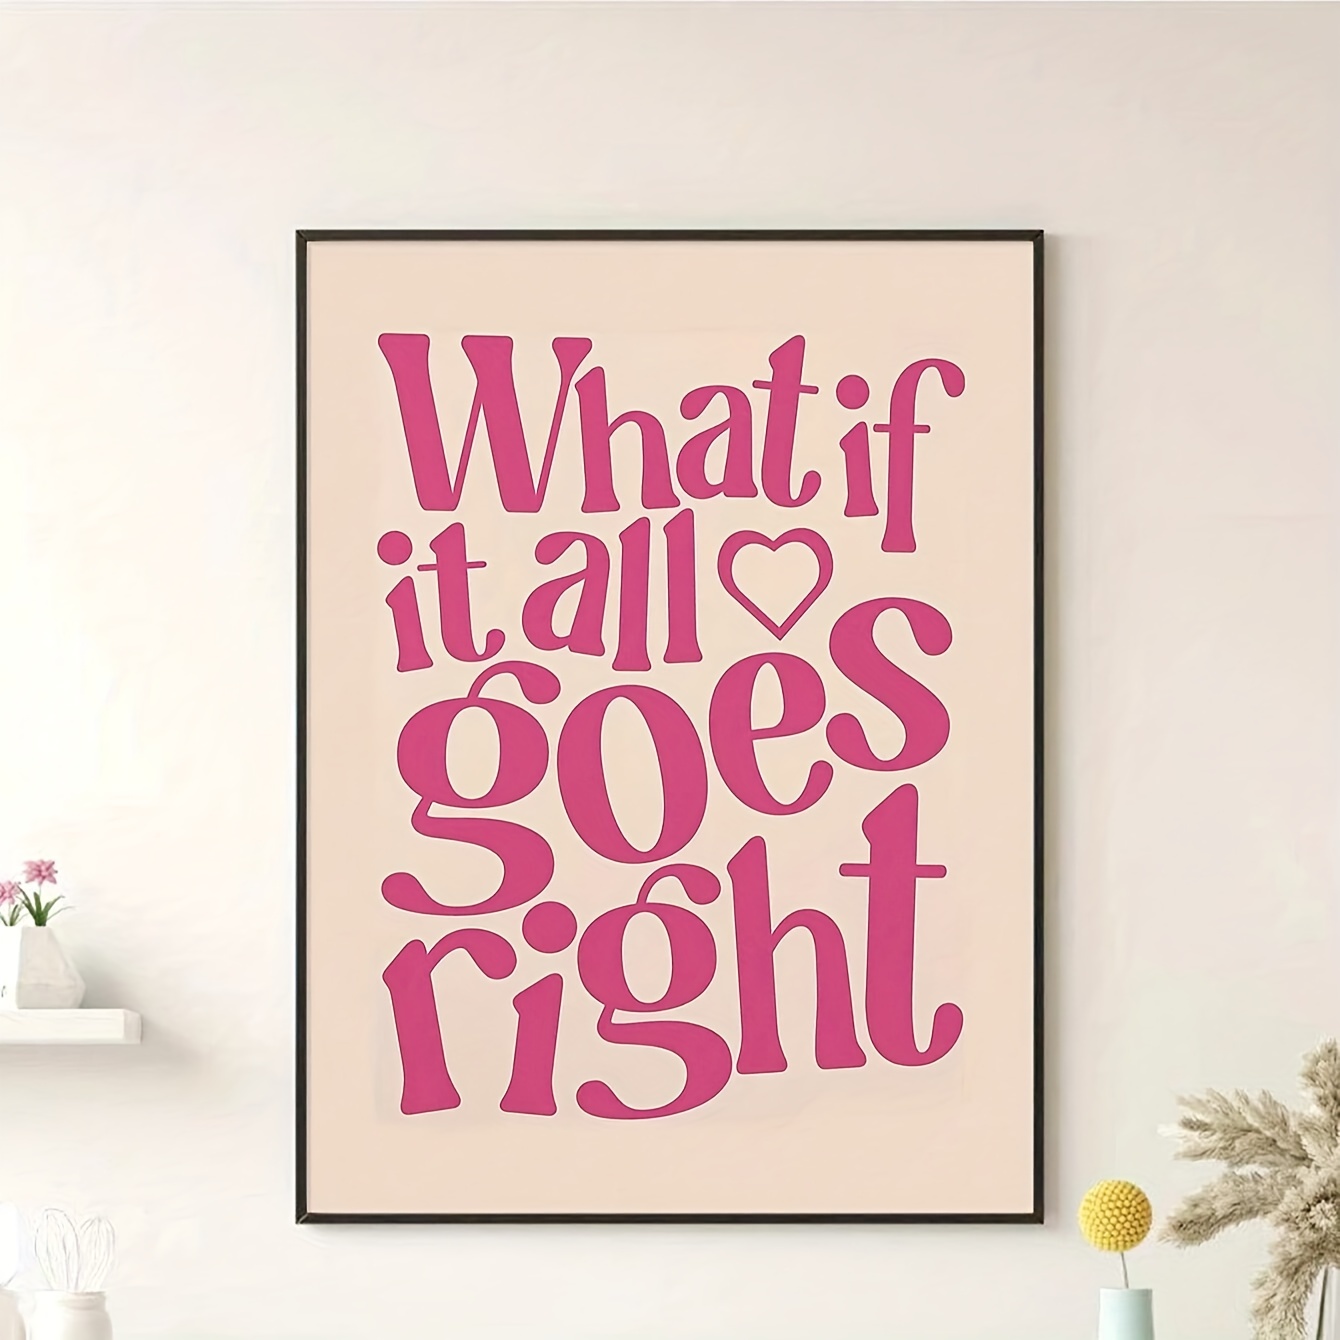 

1pc With Frame Wall Art Canvas Painting, Print Poster What If Everything Goes Right, Wall Decorations For Living Room, Bedroom, House Home